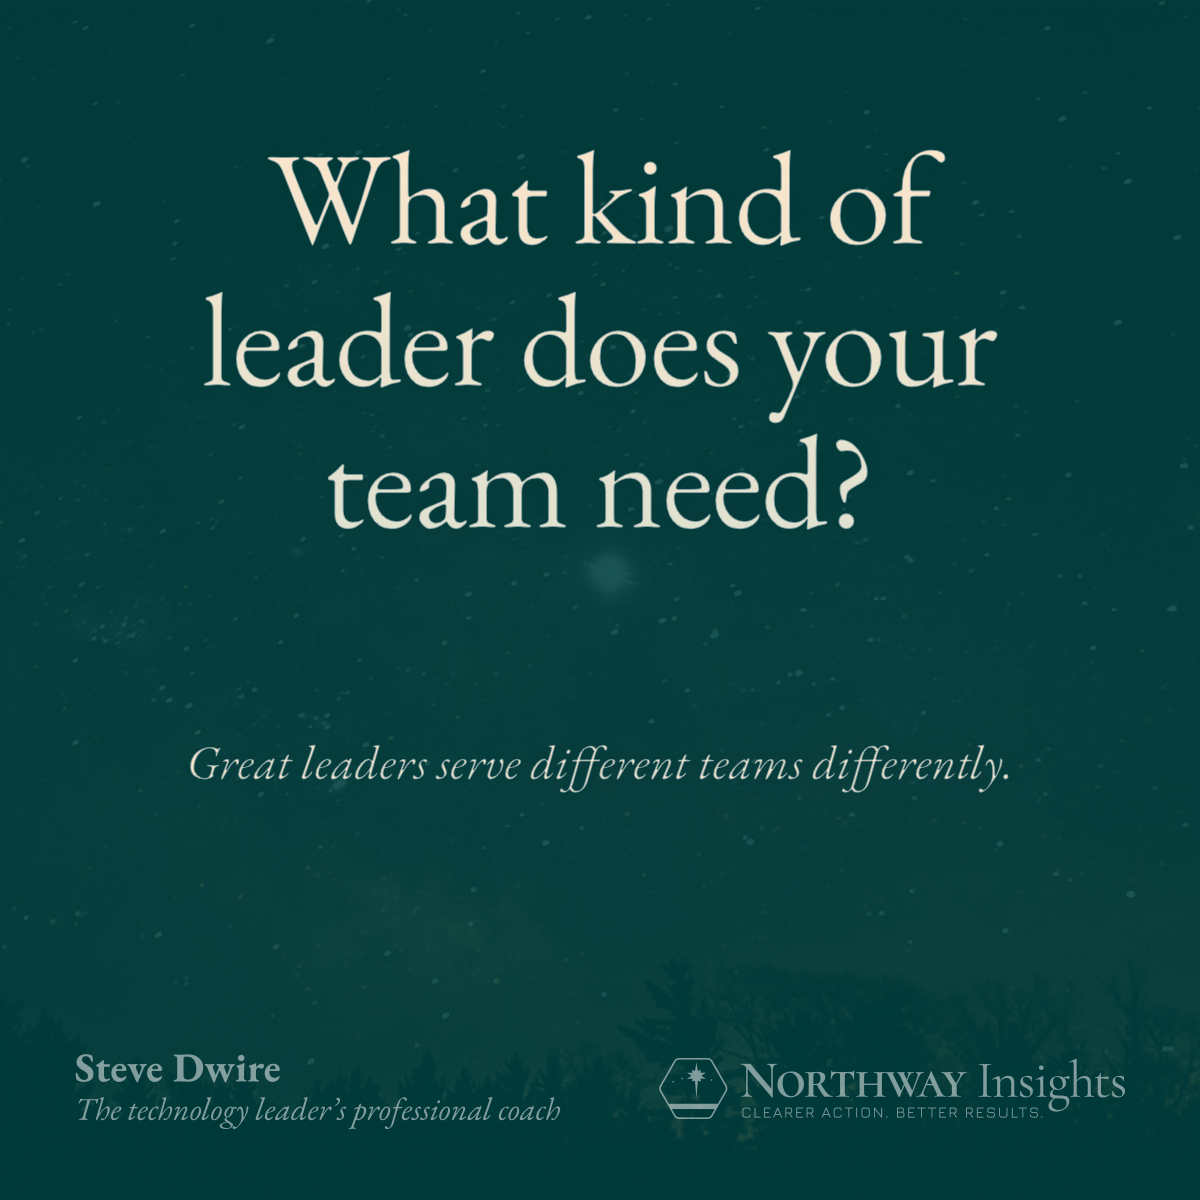 What kind of leader does your team need?